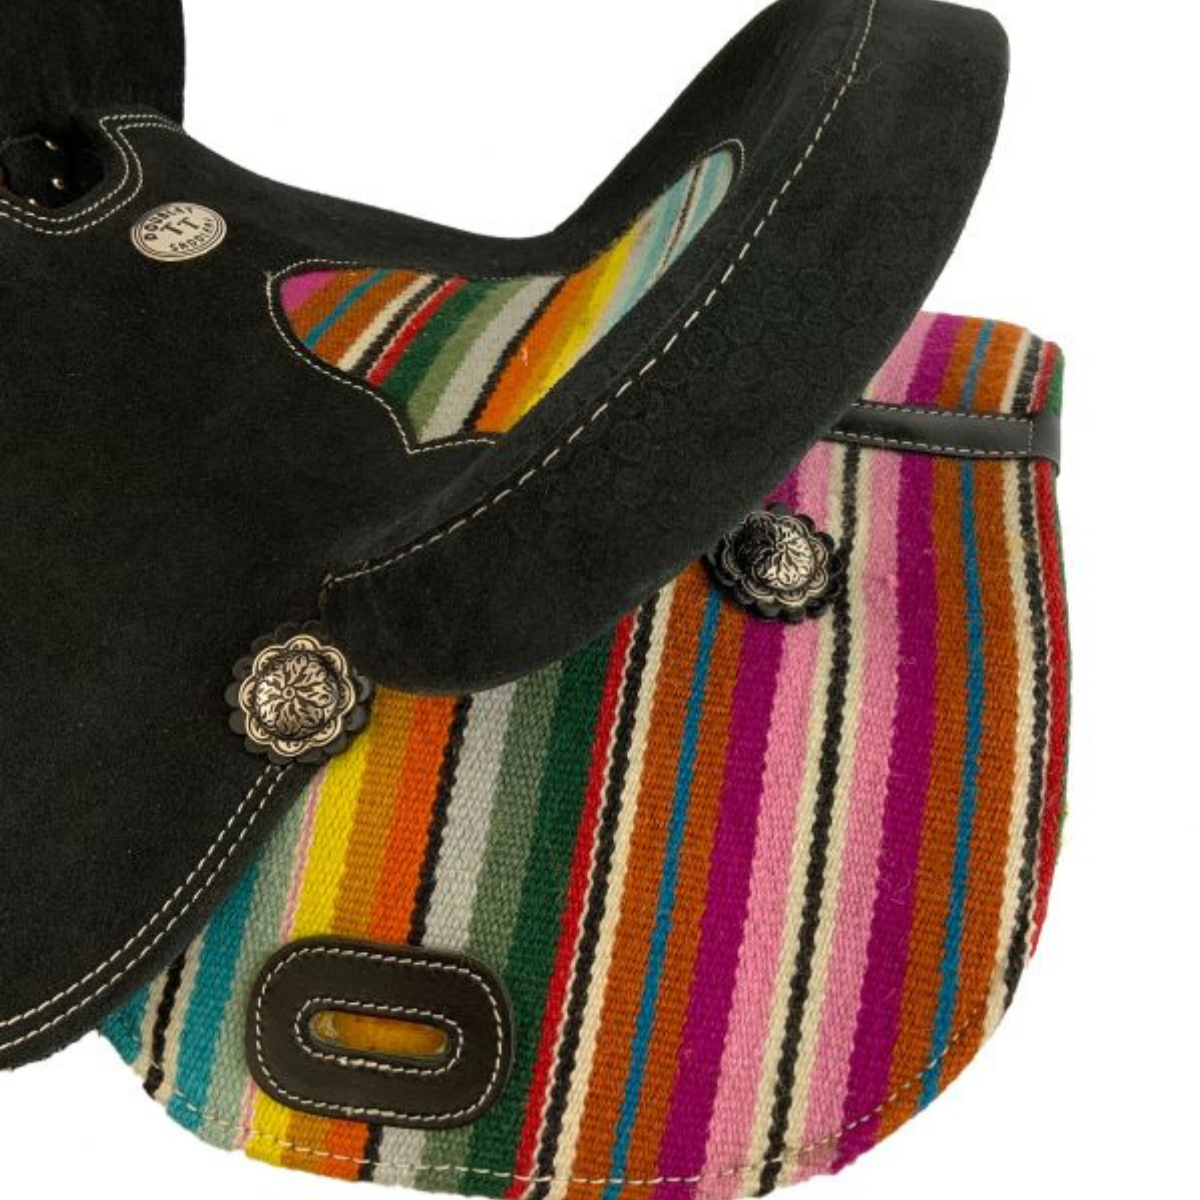 12" Double T Youth Black Roughout Barrel Saddle with Serape Wool Rug Accents. - Double T Saddles